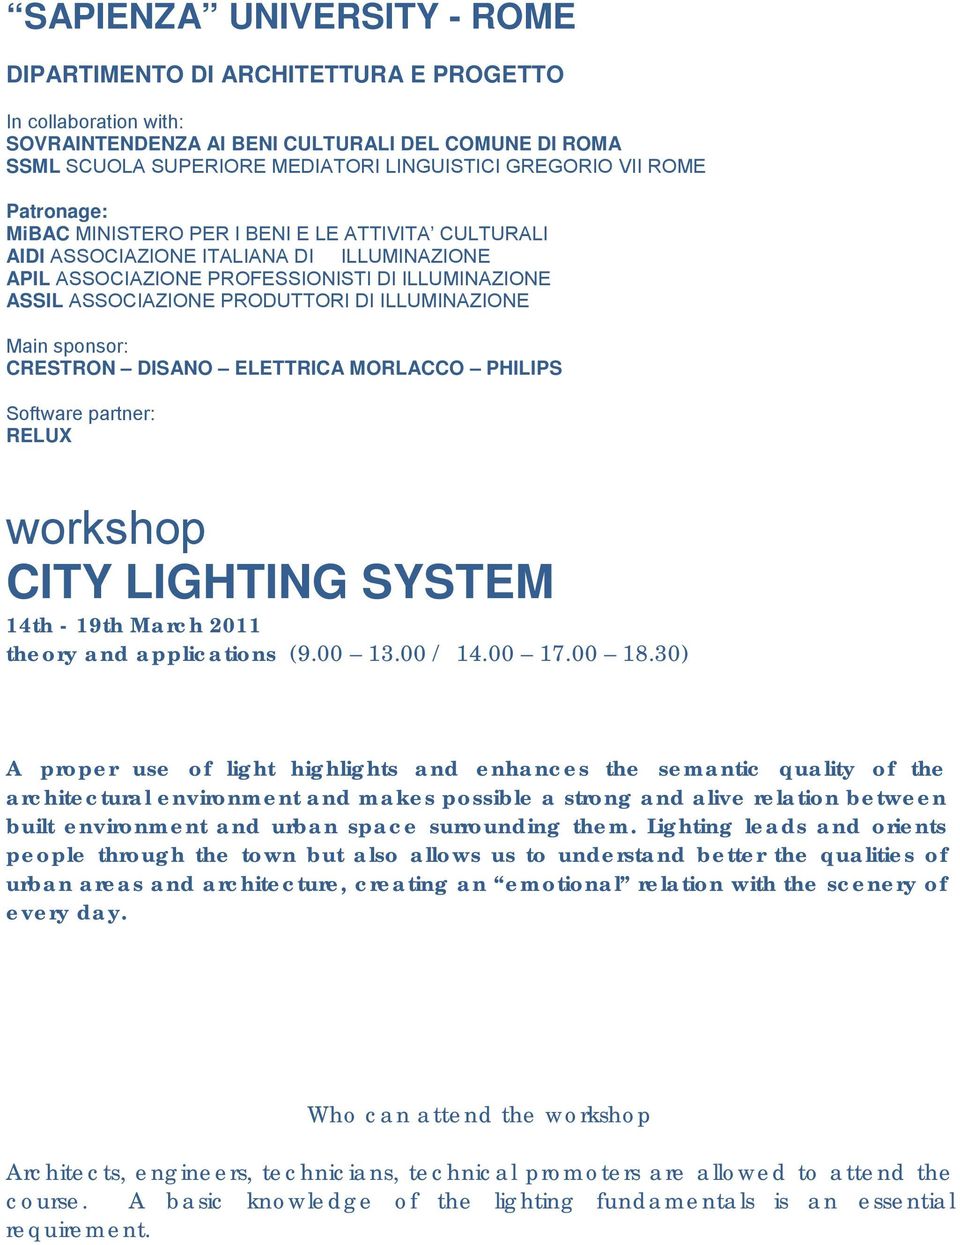 ILLUMINAZIONE Main sponsor: CRESTRON DISANO ELETTRICA MORLACCO PHILIPS Software partner: RELUX workshop CITY LIGHTING SYSTEM 14th - 19th March 2011 theory and applications (9.00 13.00 / 14.00 17.